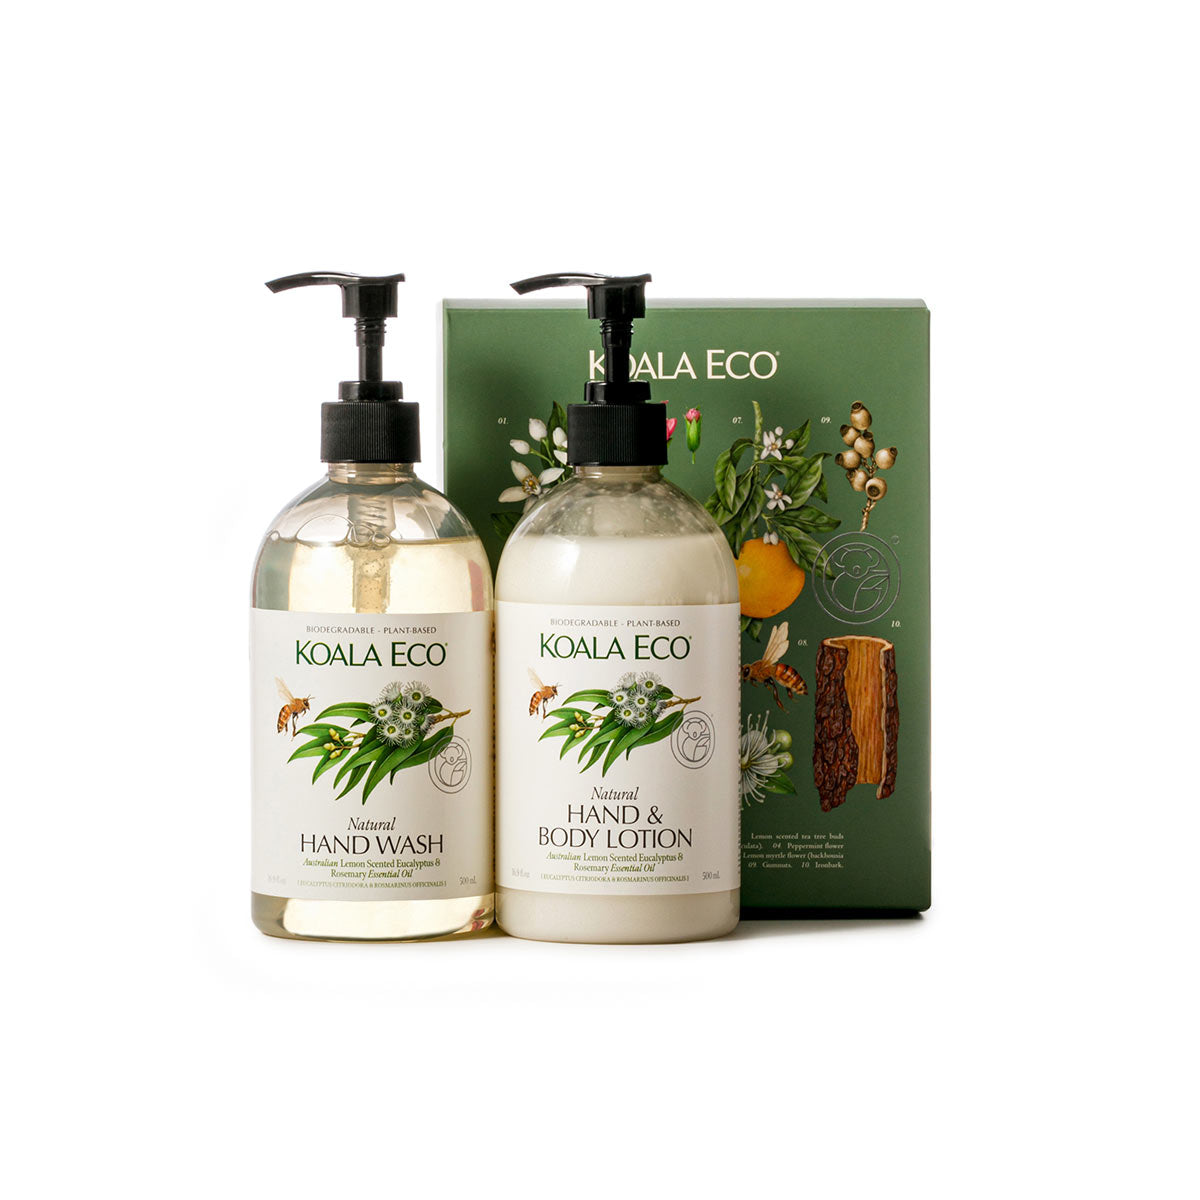 Koala Eco Natural Hand Wash- Plant-Based, Eco-Friendly & No Synthetic  Fragrance - with Australian Lemon Scented Eucalyptus & Rosemary Essential  Oil 